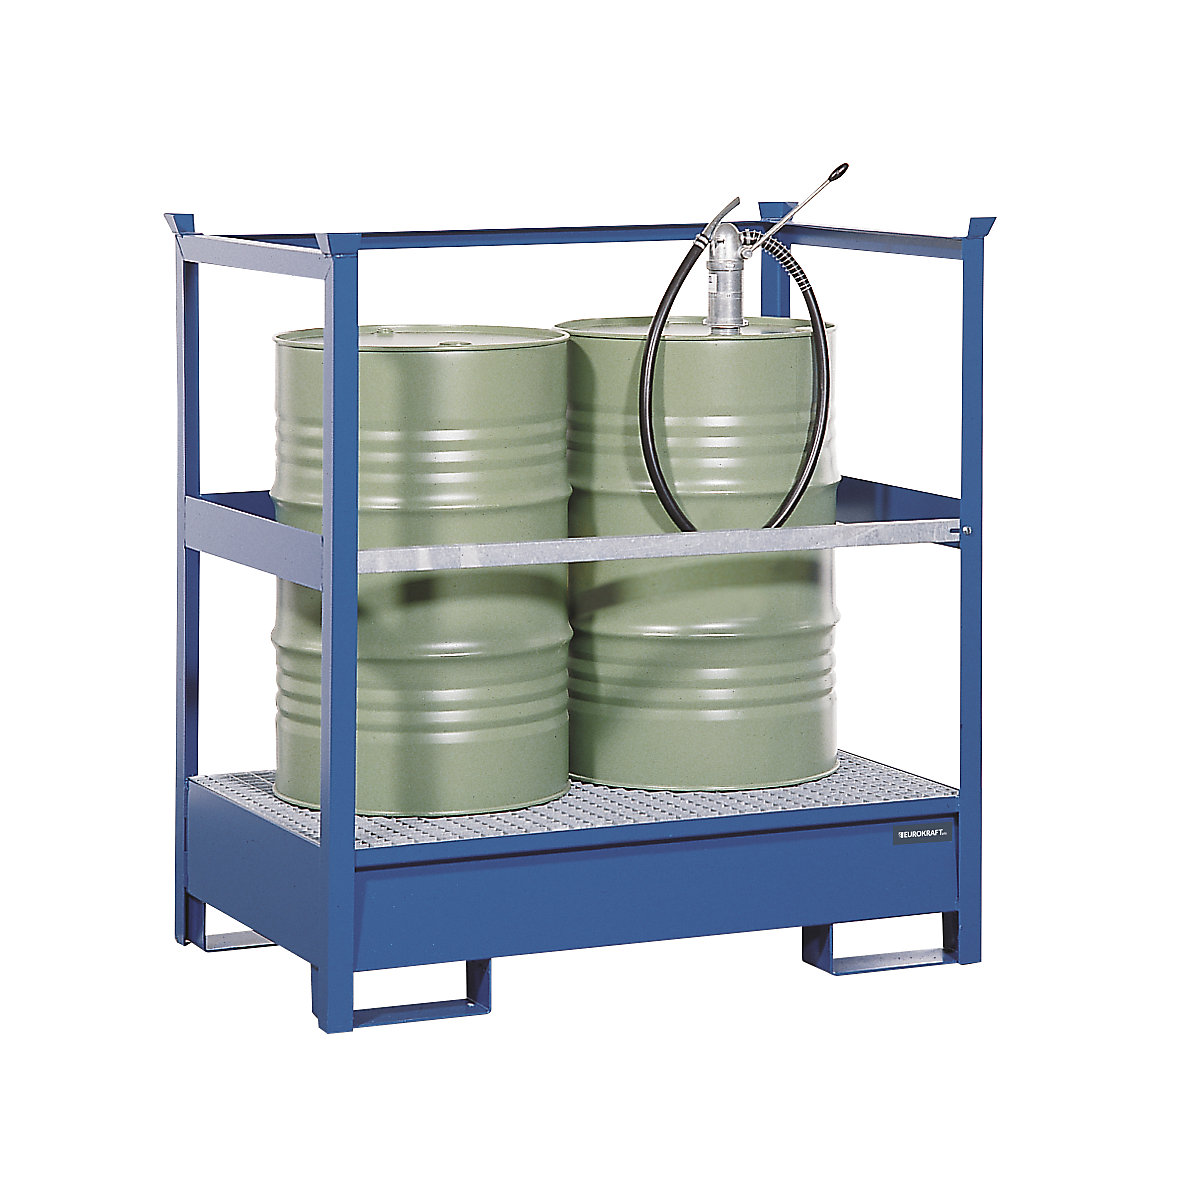 Drum sump tray for transport and storage - eurokraft pro